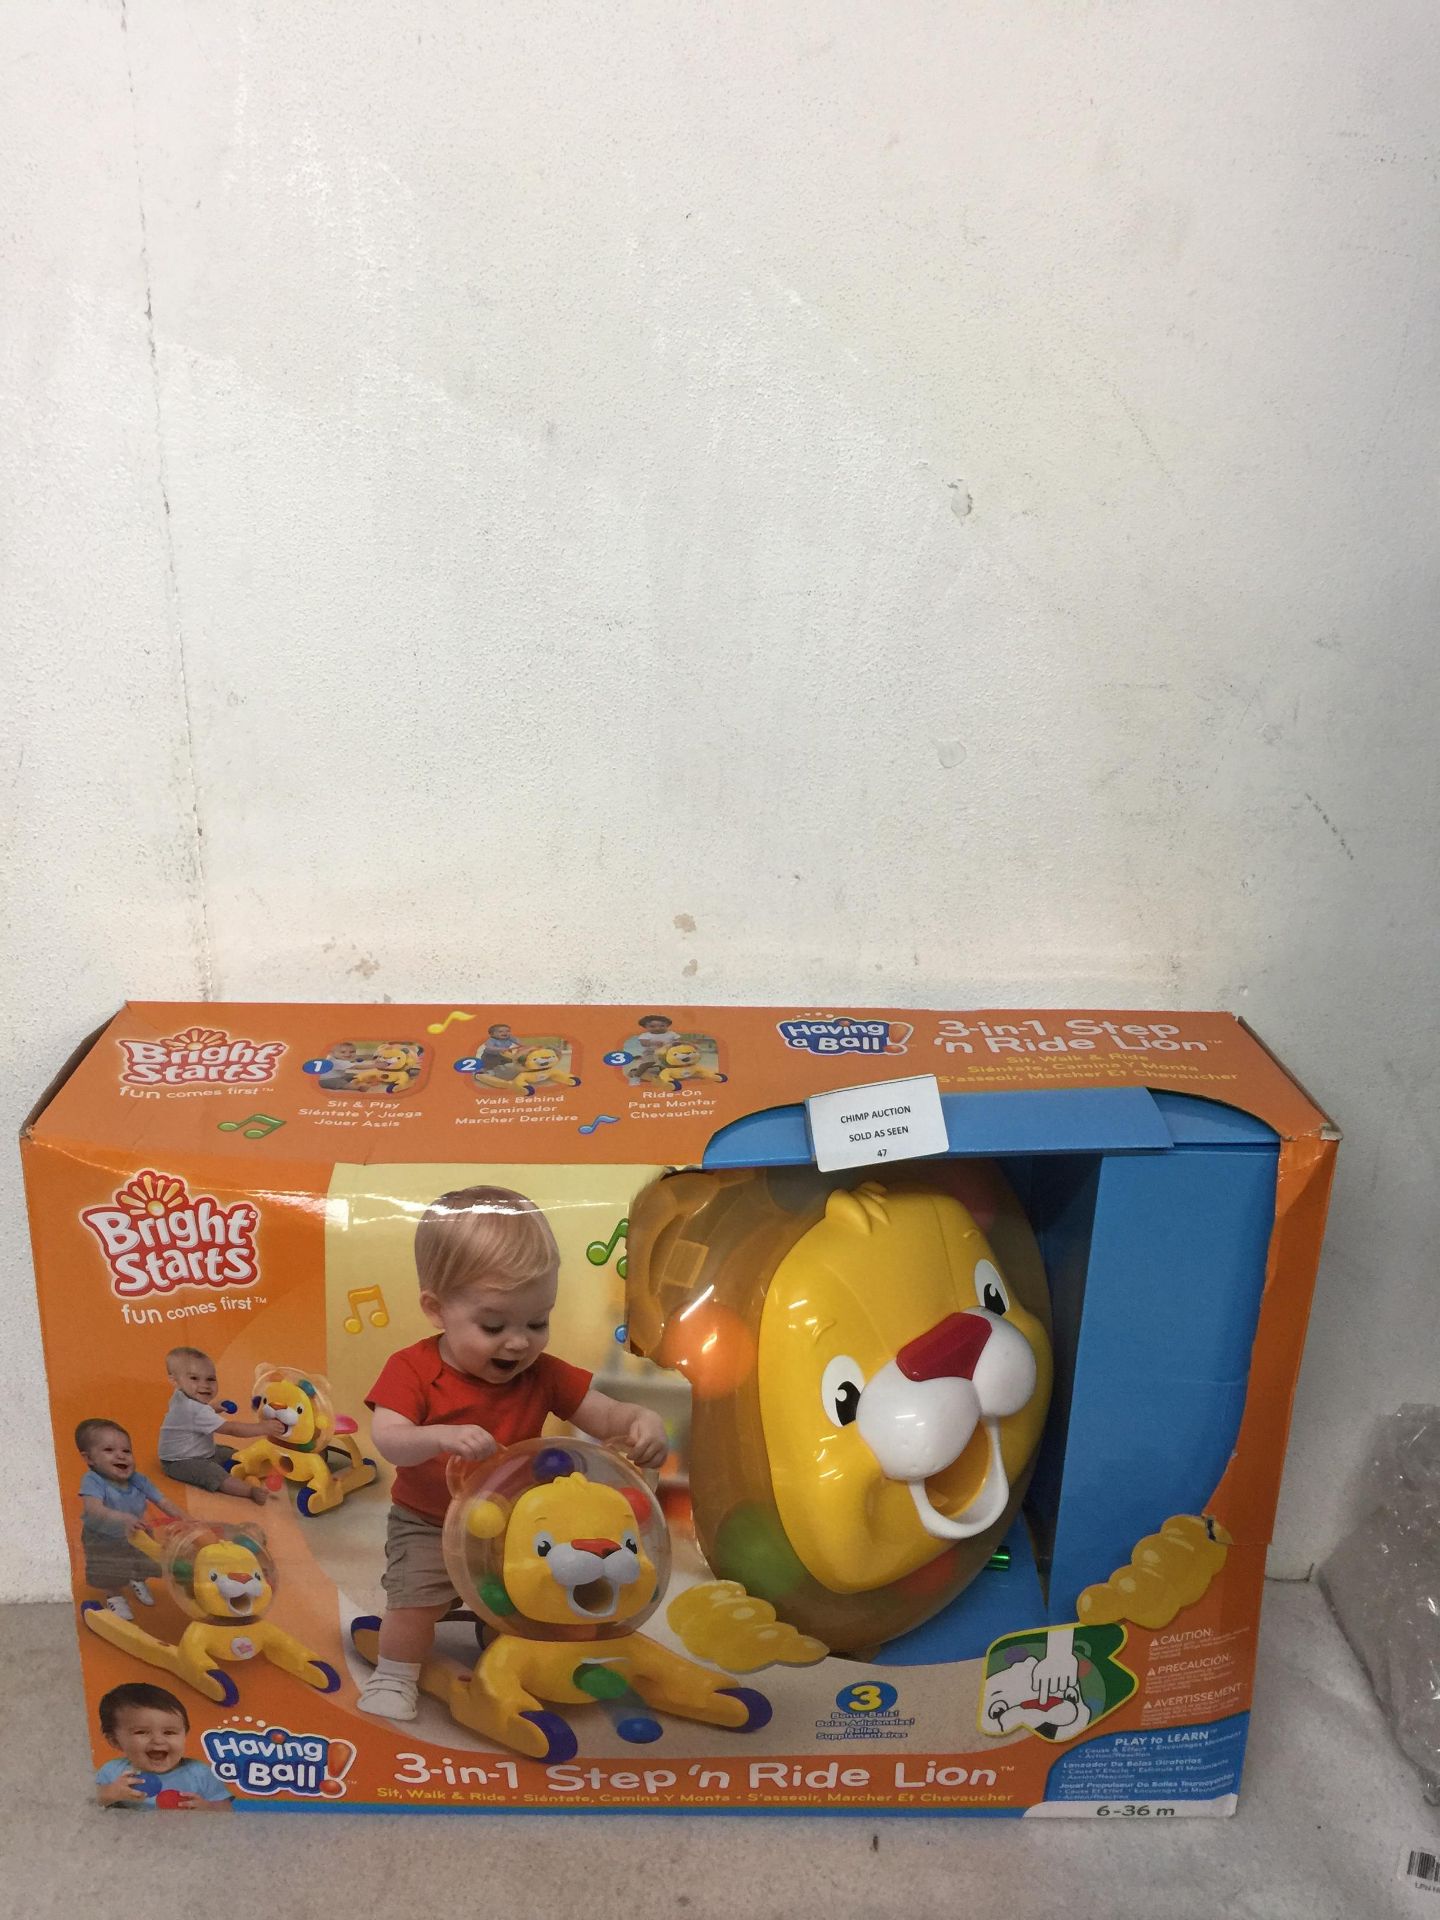 BRIGHT STARTS 3 IN 1 STEP N' RIDE LION PLAYSET